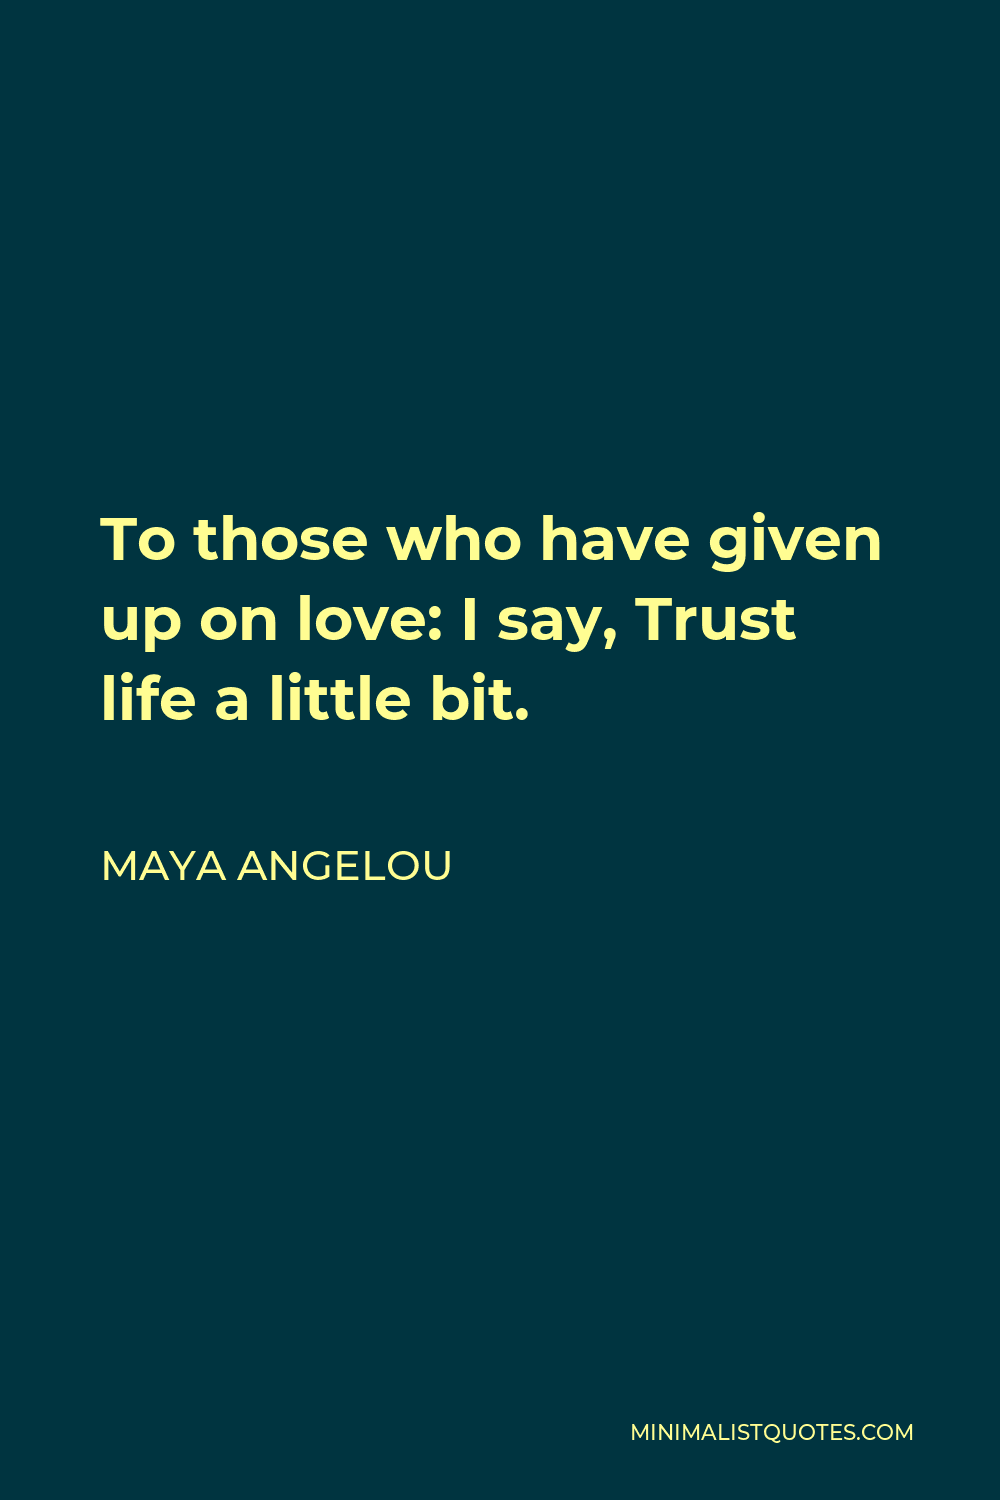 Maya Angelou Quote - To those who have given up on love: I say, Trust life a little bit.